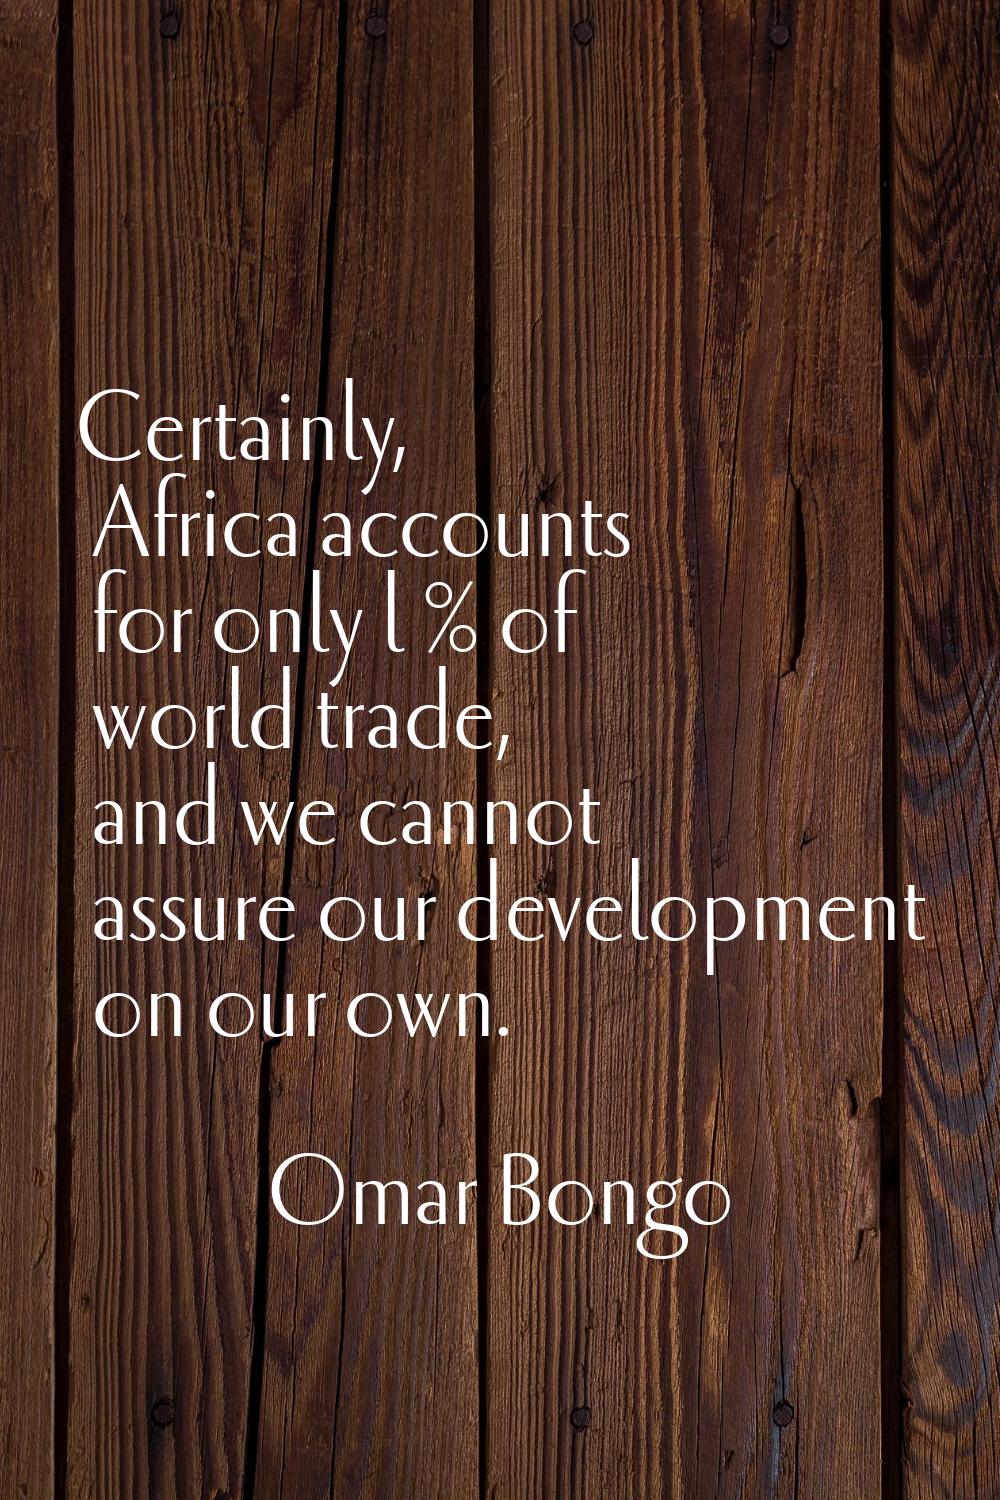 Certainly, Africa accounts for only l % of world trade, and we cannot assure our development on our